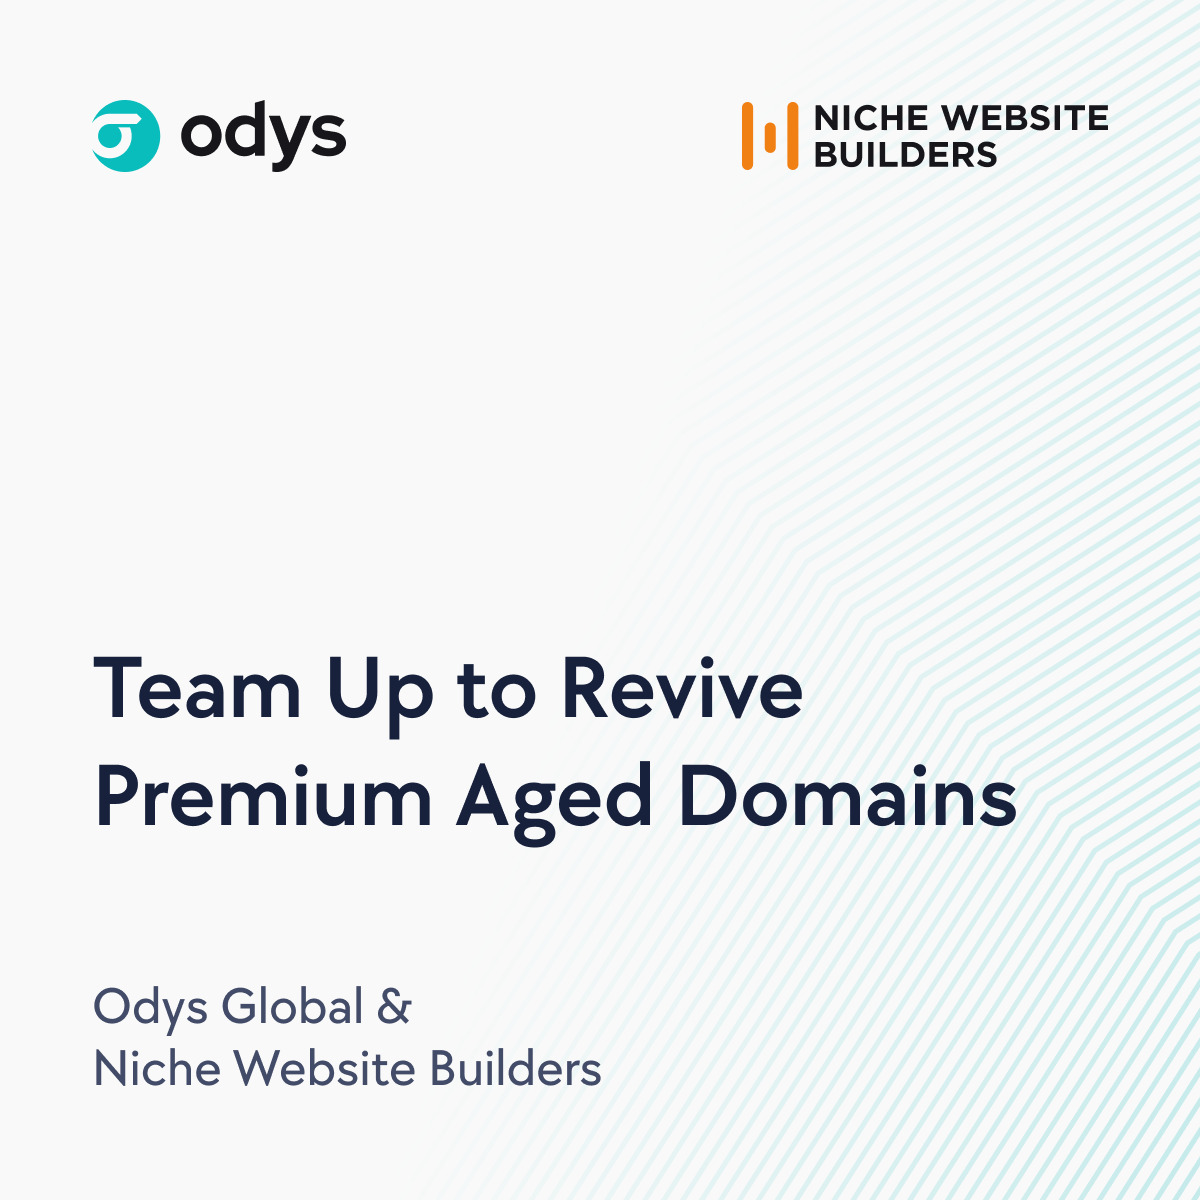 Odys aged domains